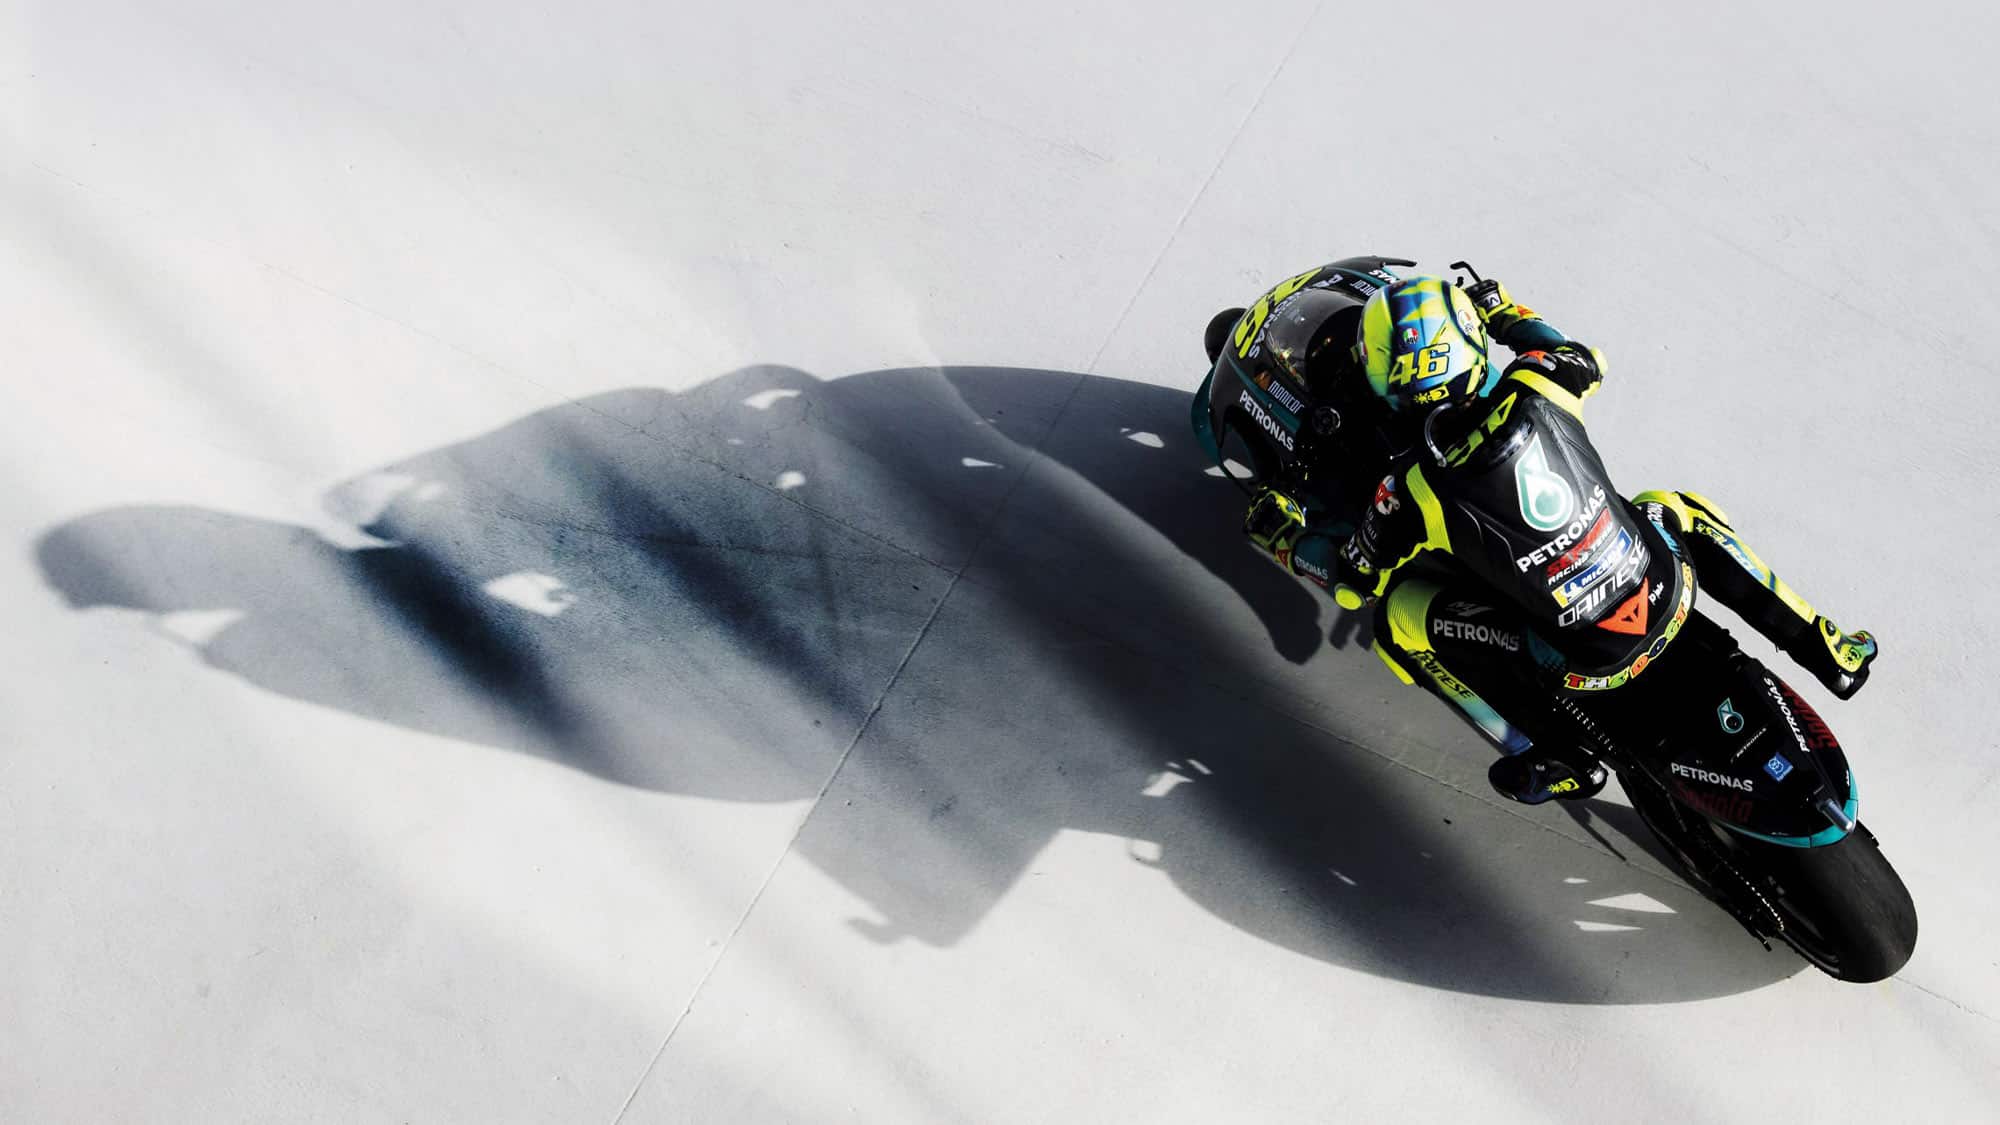 Overhead view of Valentino Rossi on his Yamaha